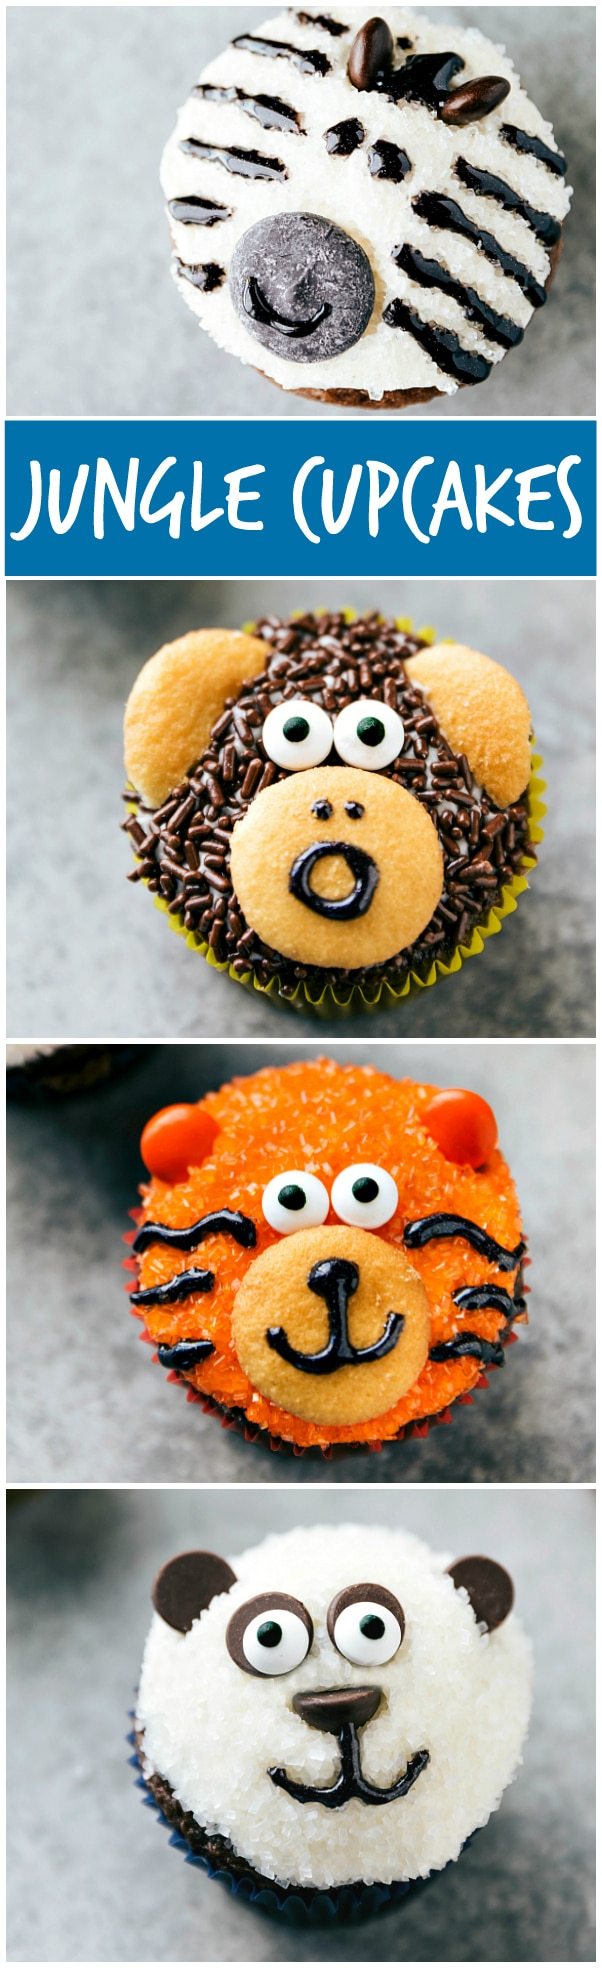 EASY JUNGLE CUPCAKES! Four simple and easy to make animal jungle cupcakes -- a zebra, monkey, tiger, and a panda. via chelseasmessyapron.com